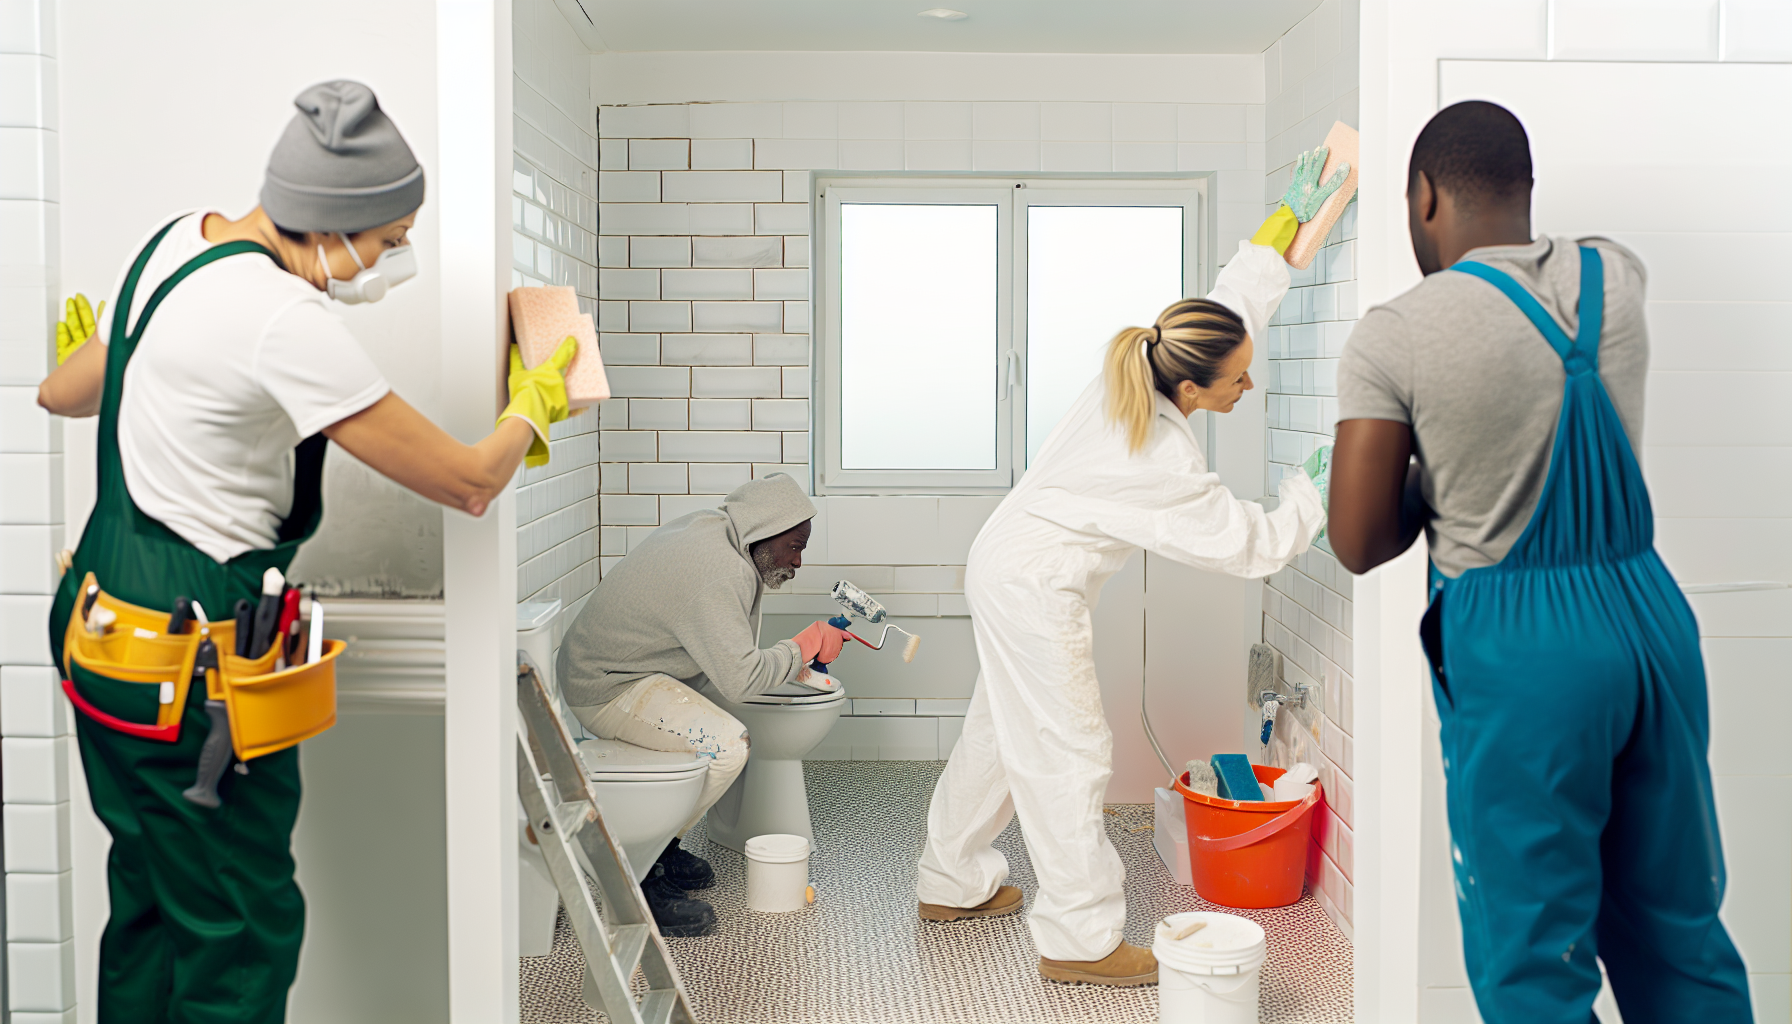 Top Picks for Best Bathroom Paint: Durable & Mold-Resistant Options